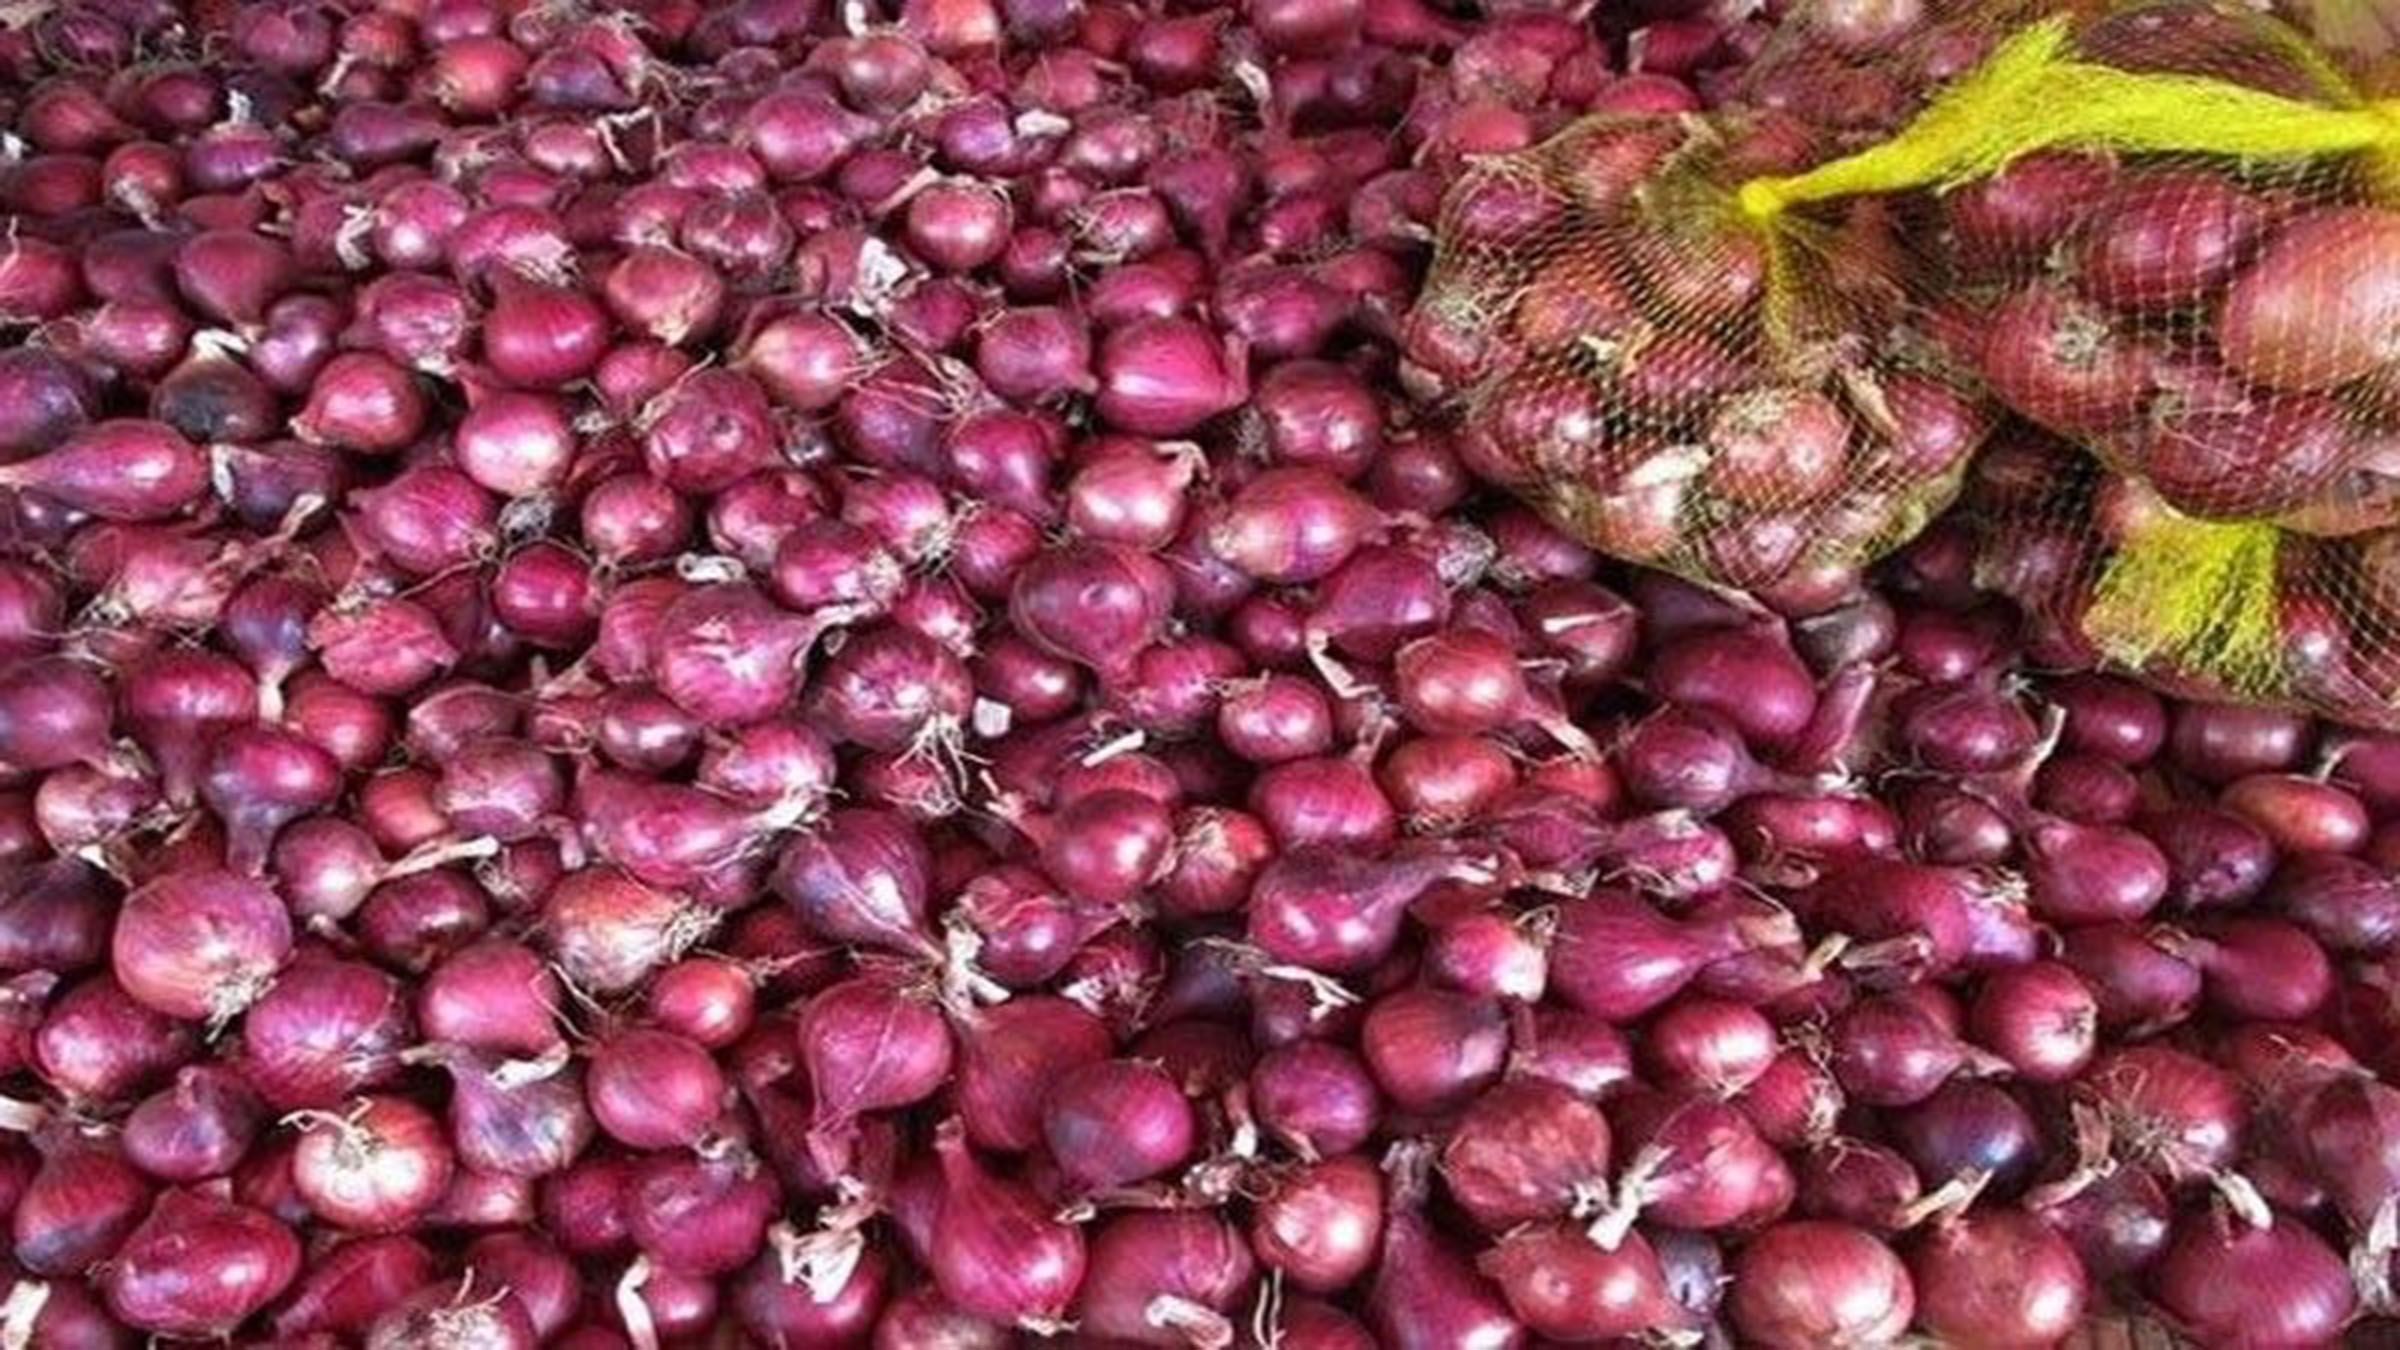 Govt. must bring onions to the market to reduce prices